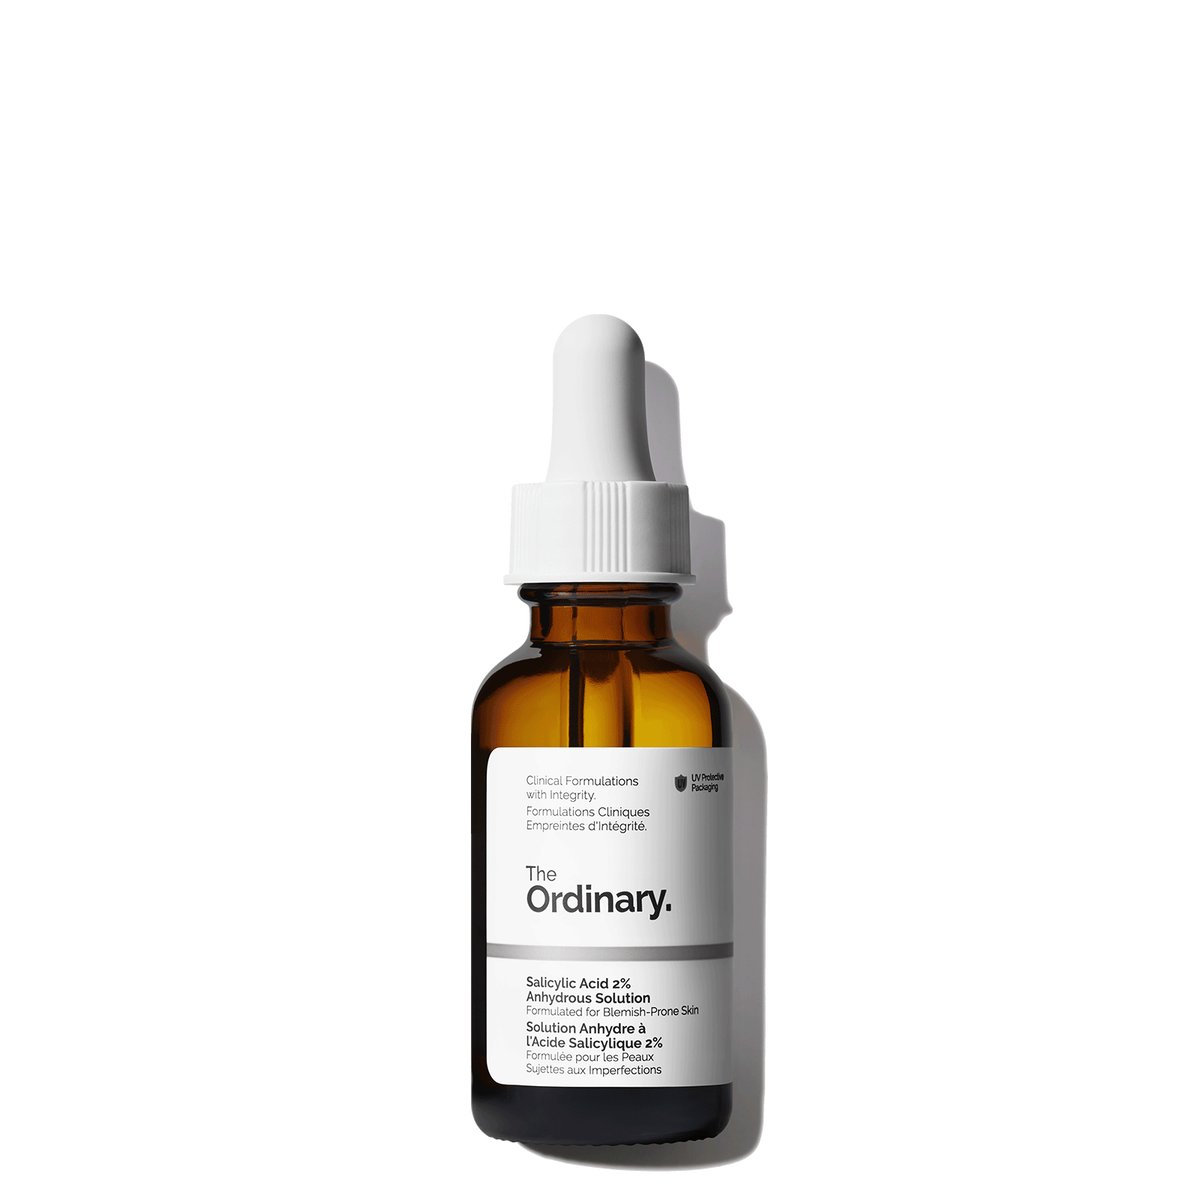 THE ORDINARY Salicylic Acid 2% Anhydrous Solution - Parafam